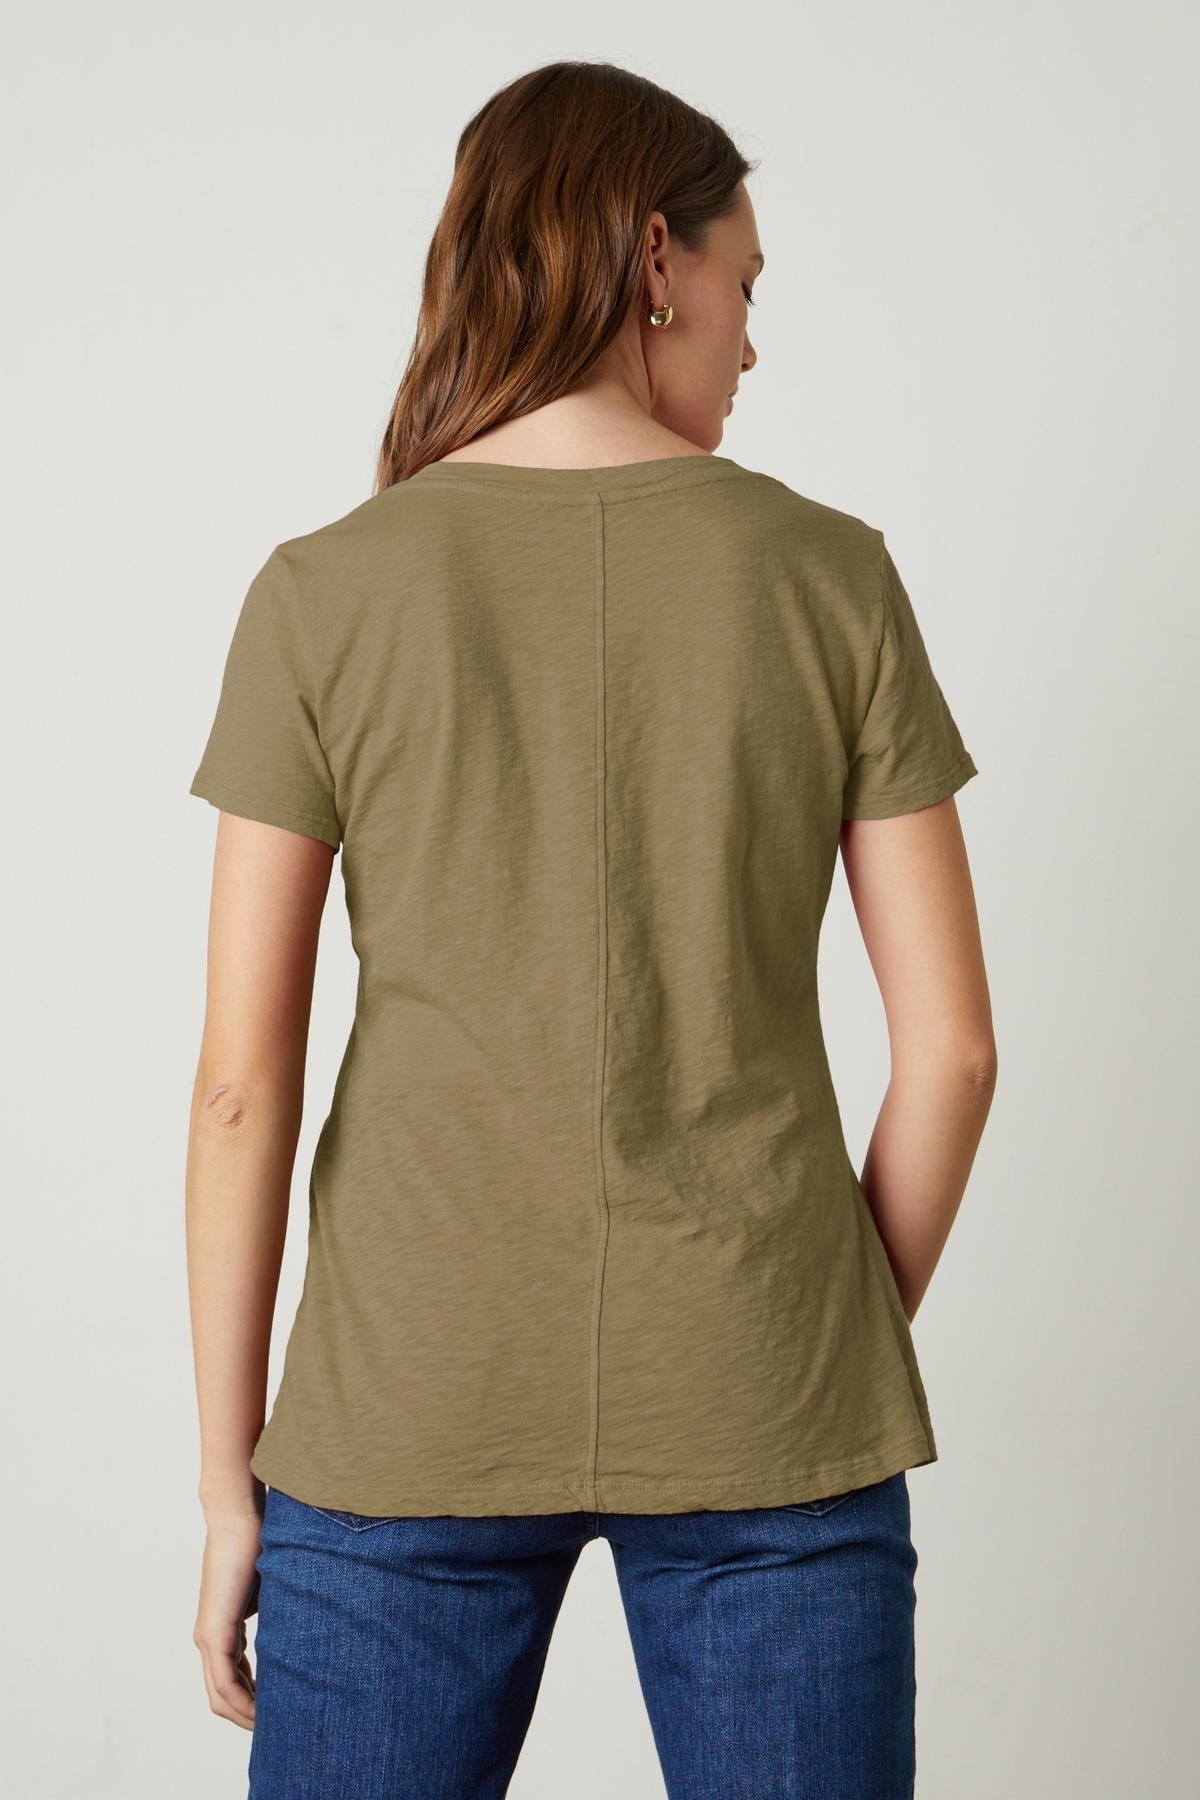 The back view of a woman wearing a Velvet by Graham & Spencer LILITH COTTON SLUB V-NECK TEE, showcasing her cool tomboy style.-35782982467777